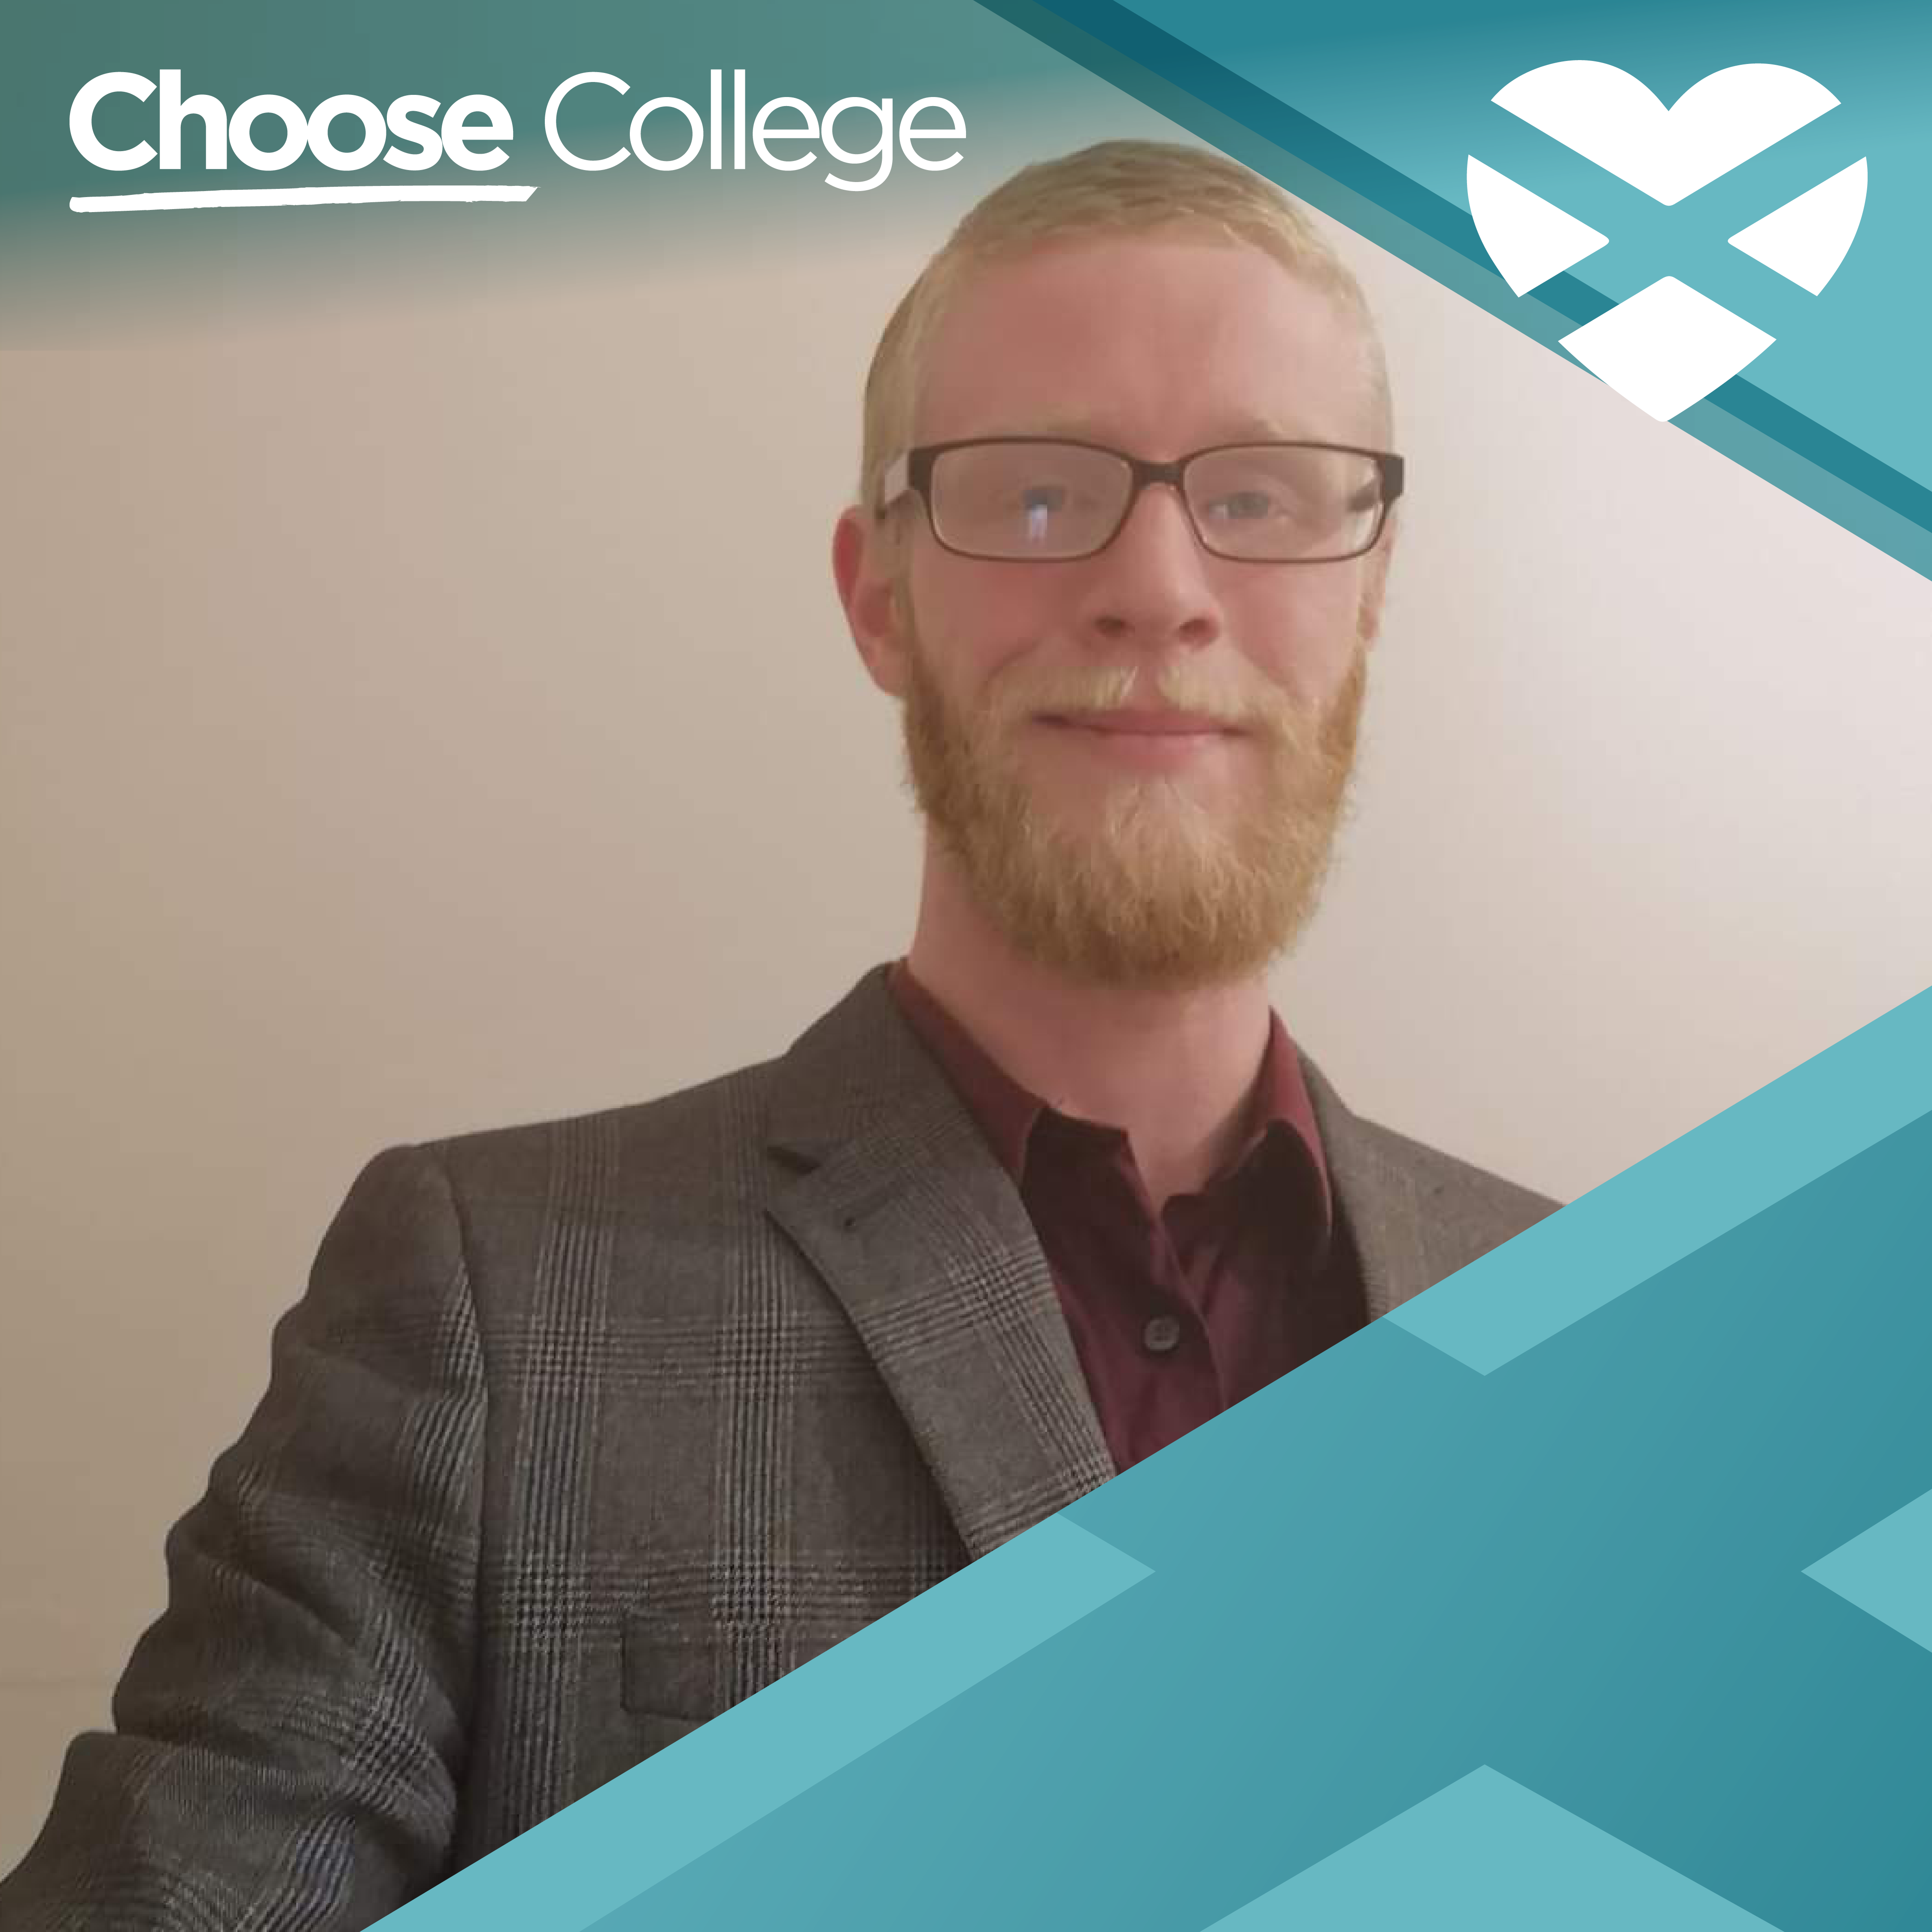 Suited Ayrshire College student with the Choose College campaign overlay